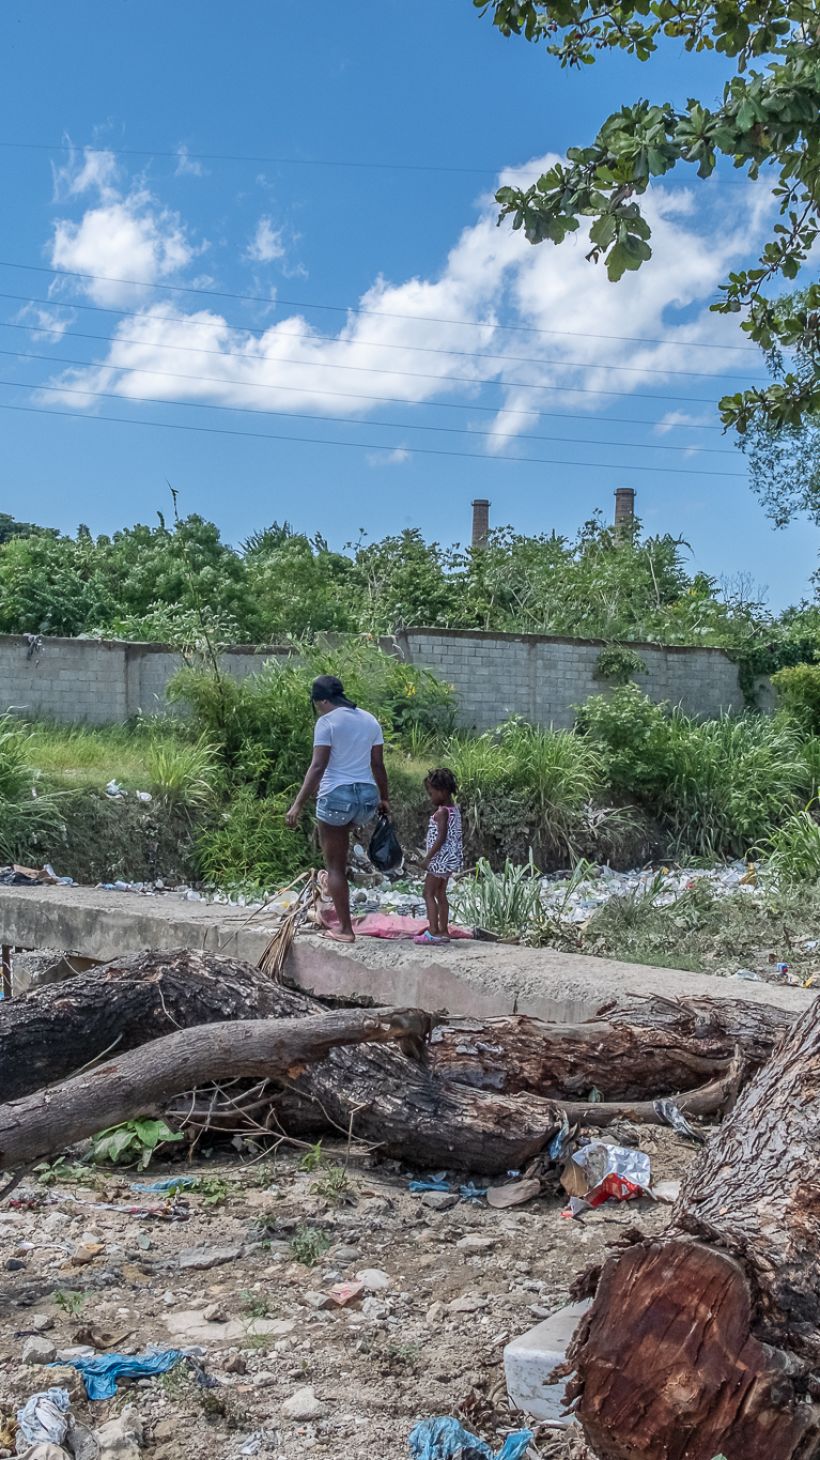 A woman and girl cross a bridge surrounded by trash